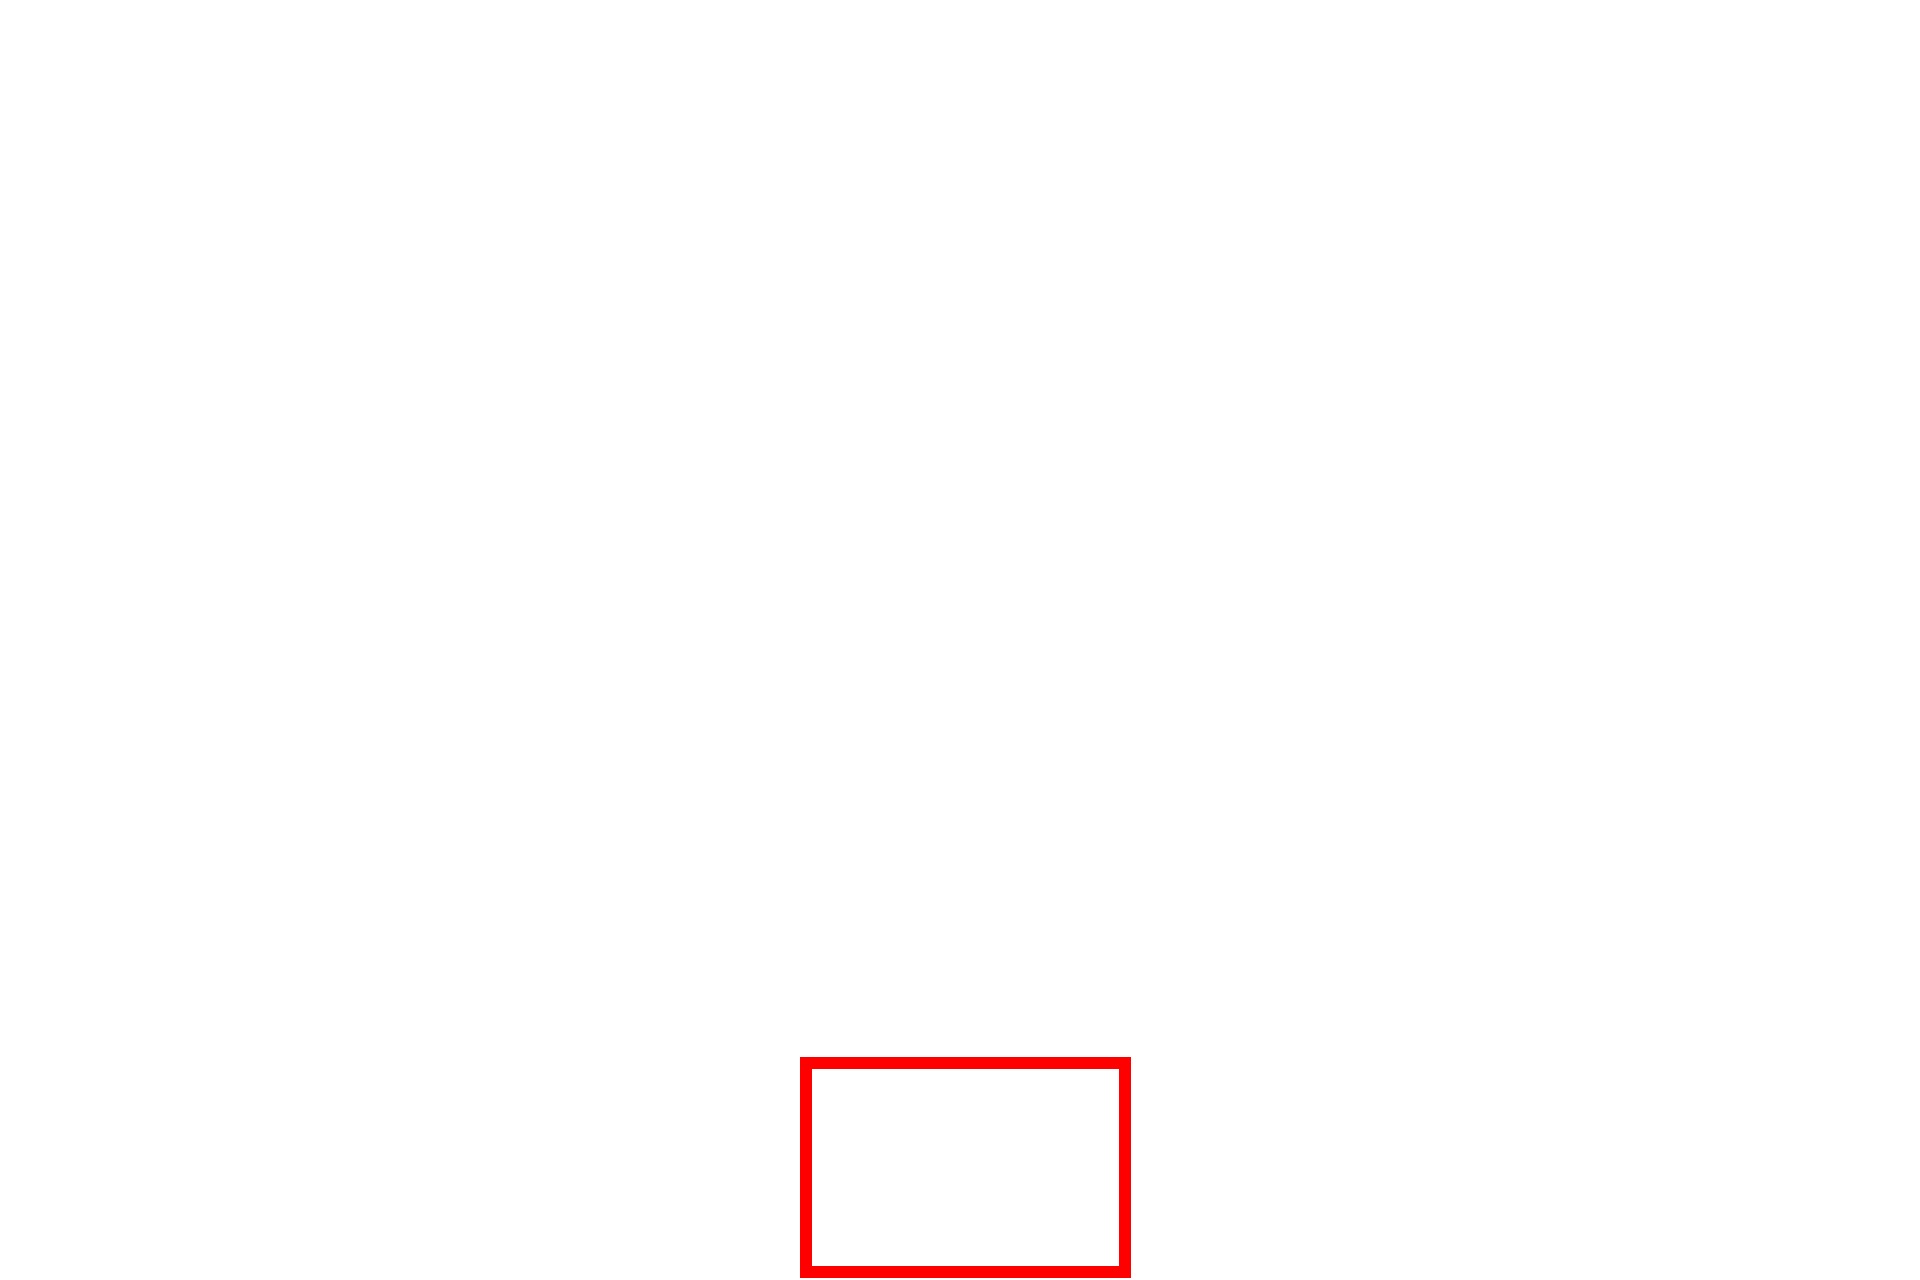 Area shown in next image <p>This area is shown at higher magnification in the next image</p>
